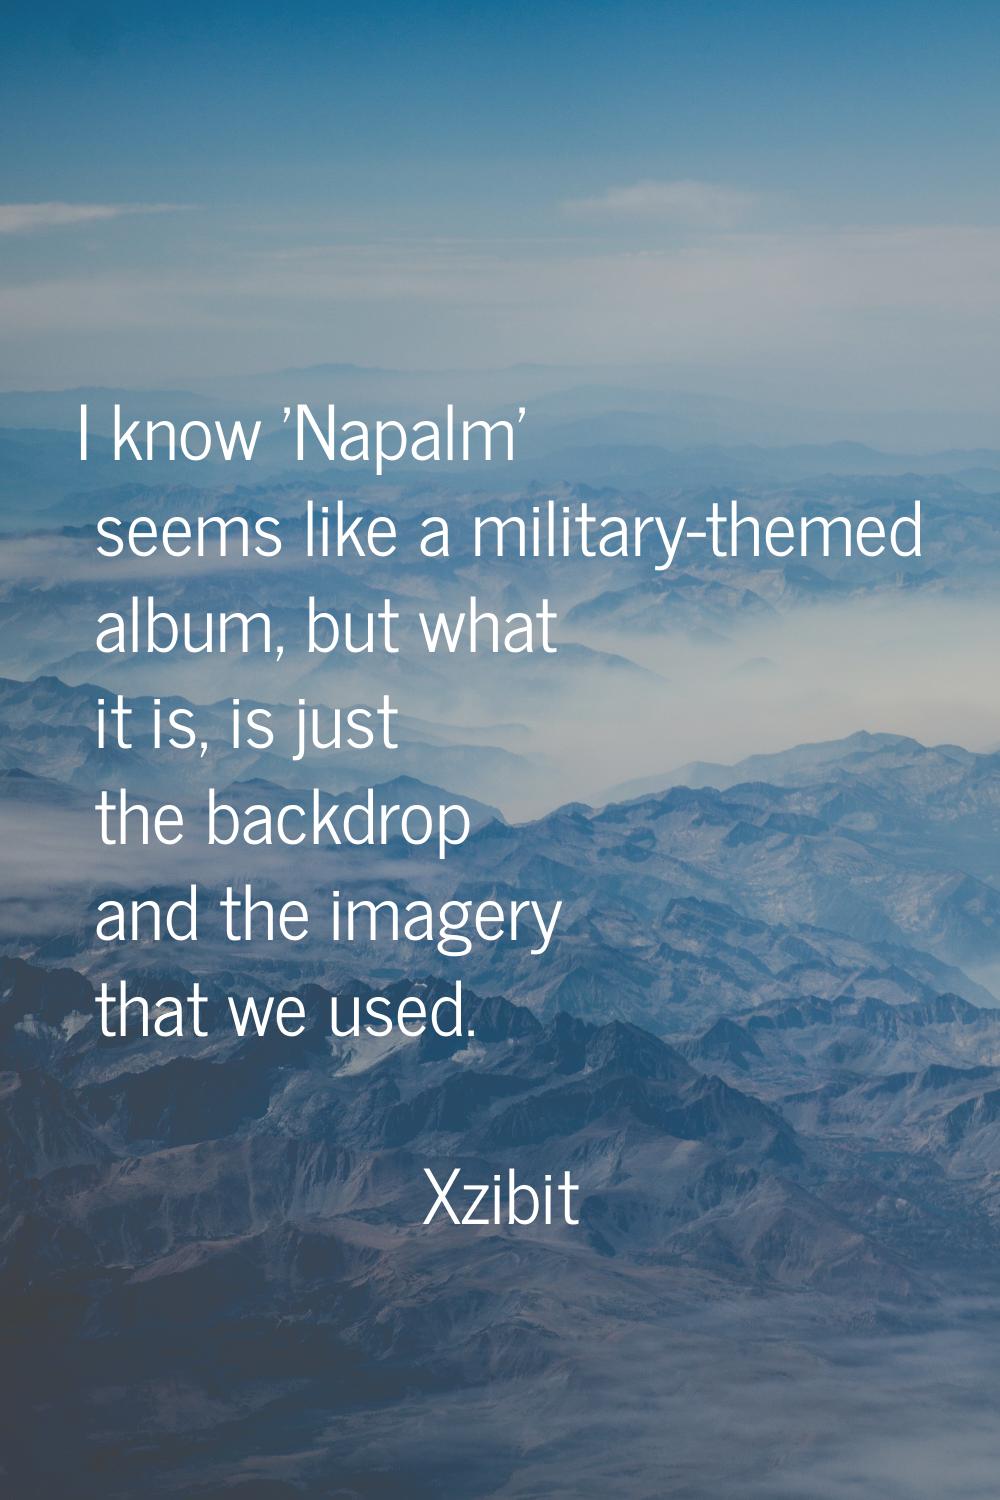 I know 'Napalm' seems like a military-themed album, but what it is, is just the backdrop and the im